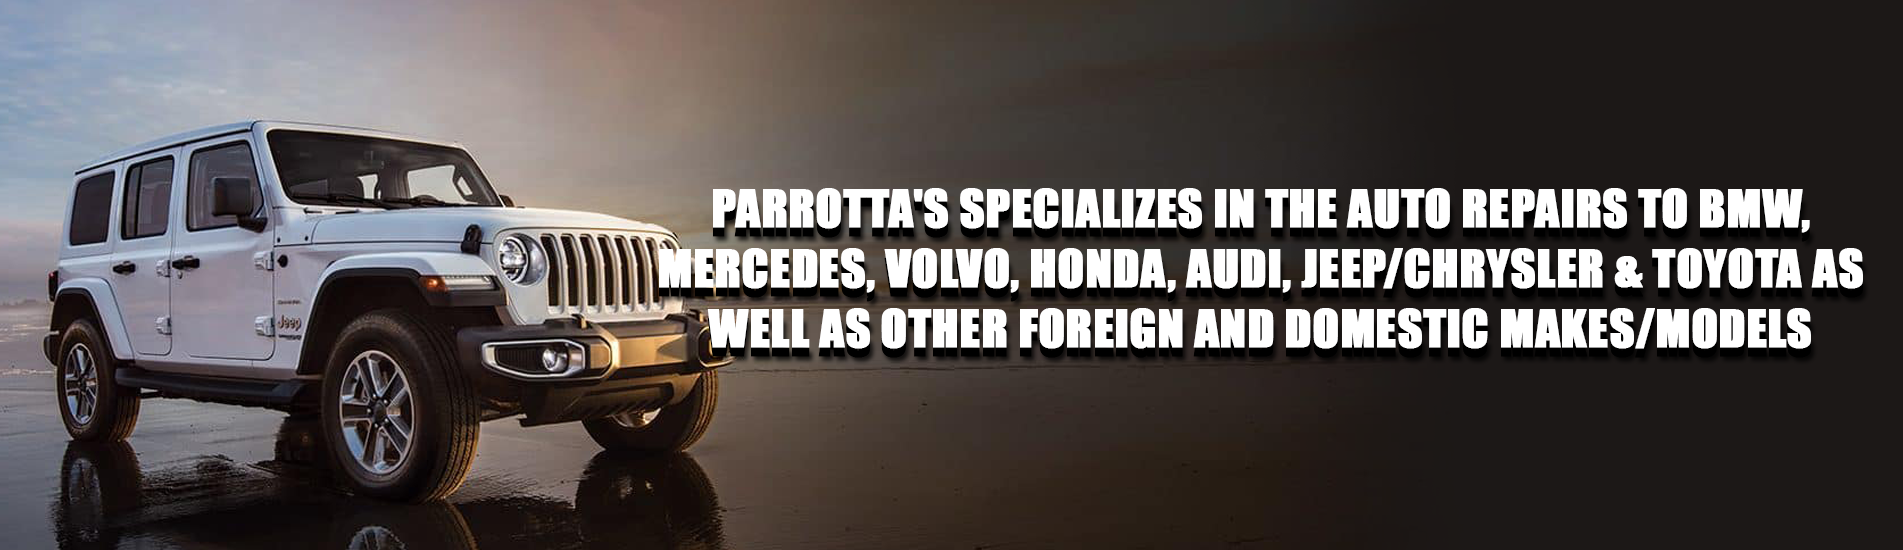 Parrotta's specializes in the auto repairs to BMW,MercedenZ,Toyota,Volvo & Jeep/Chrystler as well as other foreign and domestic makes/models